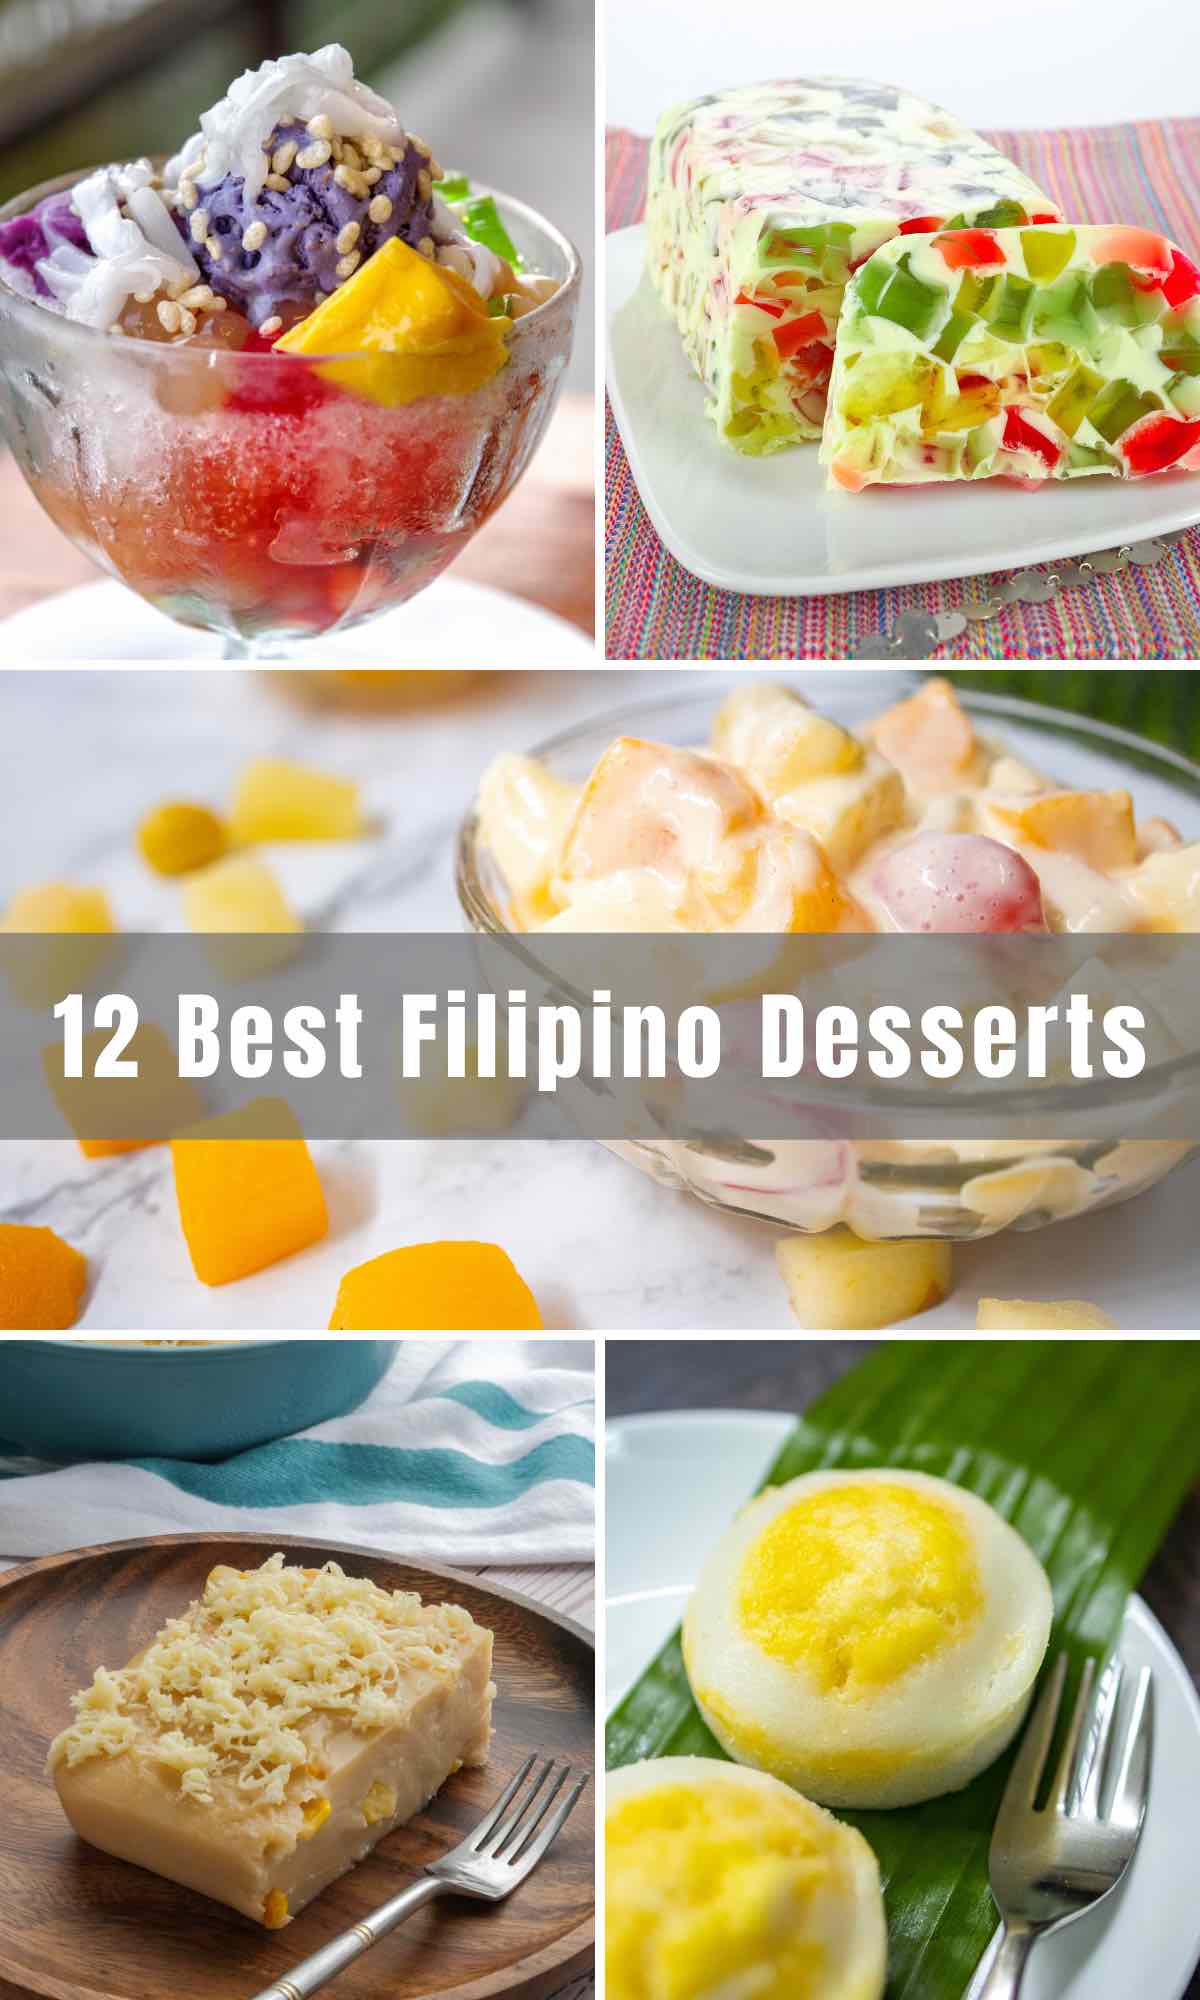 If you have a sweet tooth and you’ve been wanting to expand your confectionery horizons, try a few of these authentic Filipino Desserts. Filipinos use simple ingredients like coconuts, fruits, and rice to create delicious treats your entire family can enjoy.